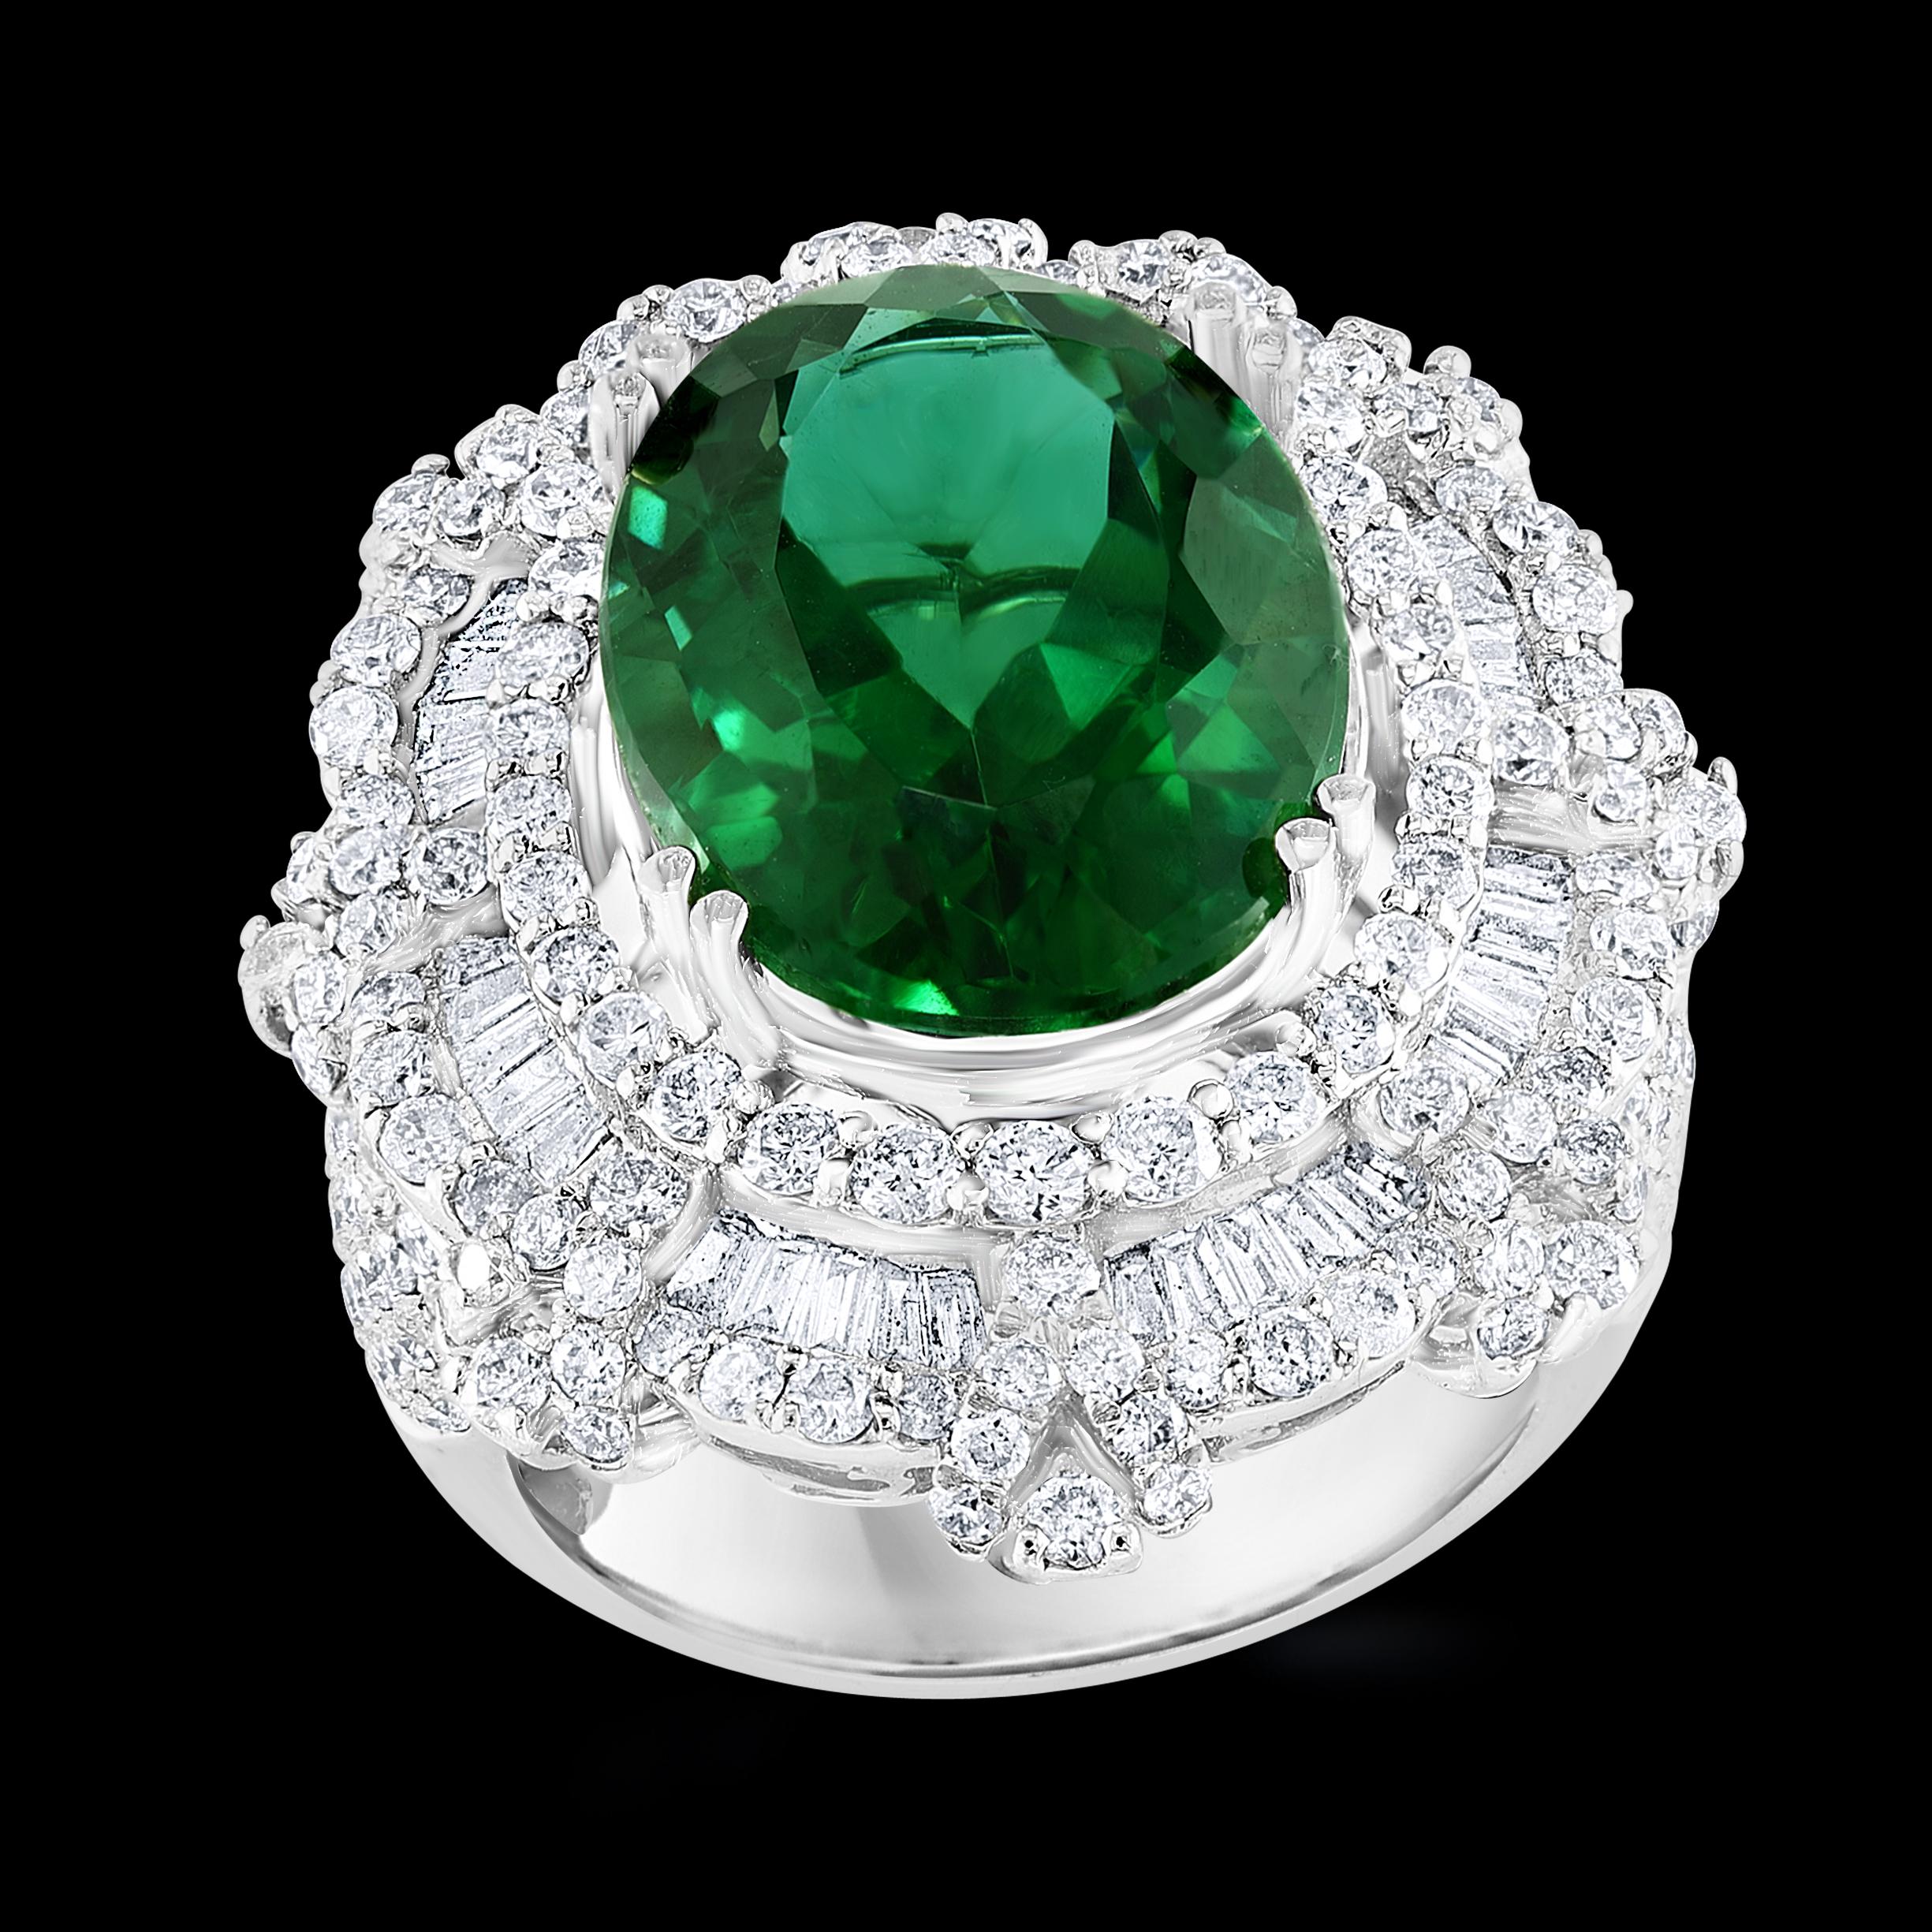  8.7 Carat Green Tourmaline & 4.2 Carat Diamond Cocktail Ring 18 Karat White Gold Estate
This spectacular Cocktail ring   consisting of a single Oval  Shape Green Tourmaline  8.7 Carat.  The  Green Tourmaline  is surrounded by approximately  4.2